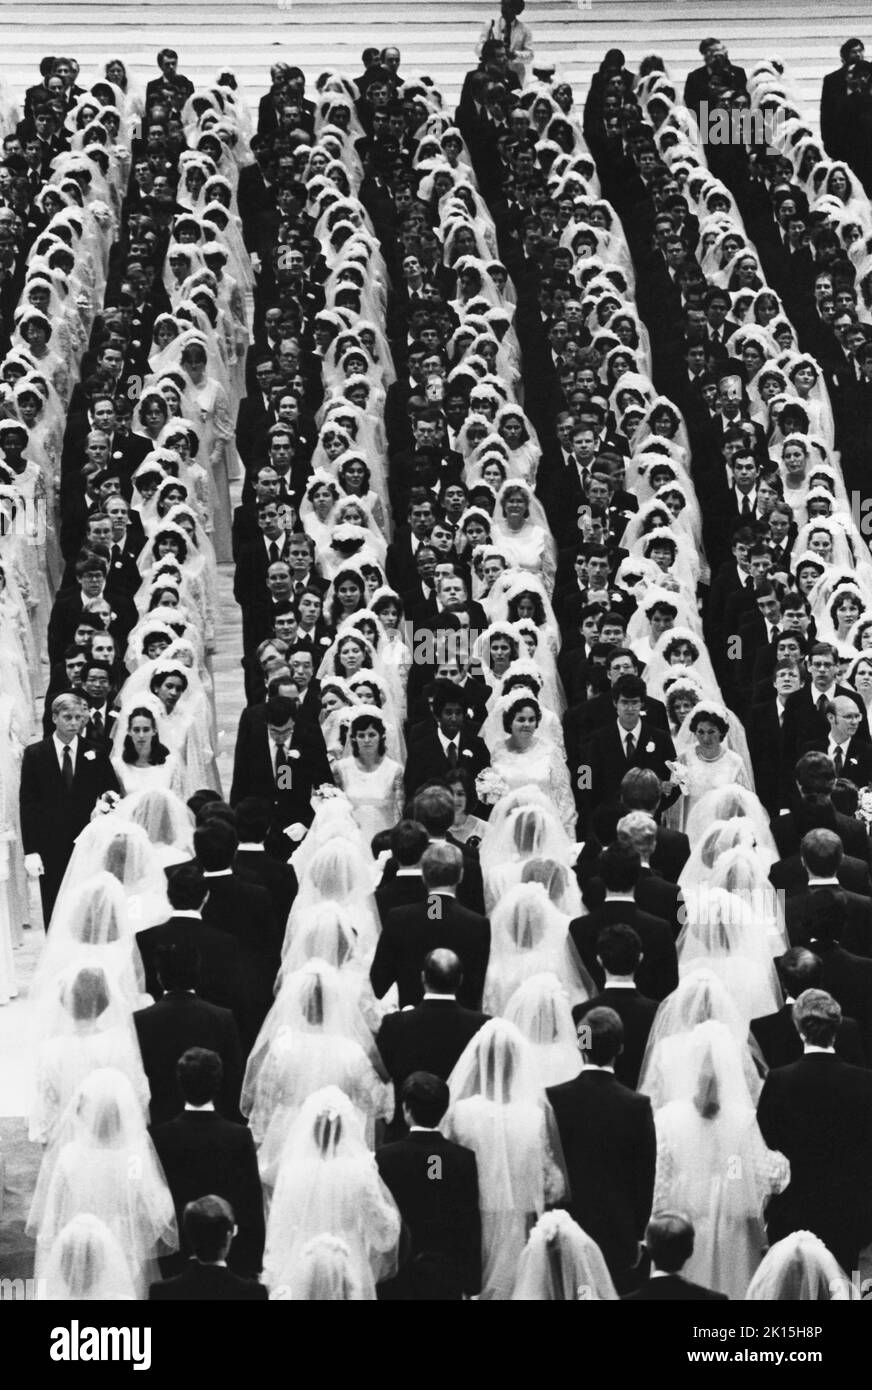 A Moony wedding or 'blessing ceremony' at Madison Square Garden, where Reverend Sun Myung Moon spiritually married over 2000 couples in 1982.  Moon (born 1920 in Korea) is the founder of the Unification Church.  He believes that he is the Second Coming of Christ.  He frequently conducts mass spiritual weddings among his followers. Stock Photo